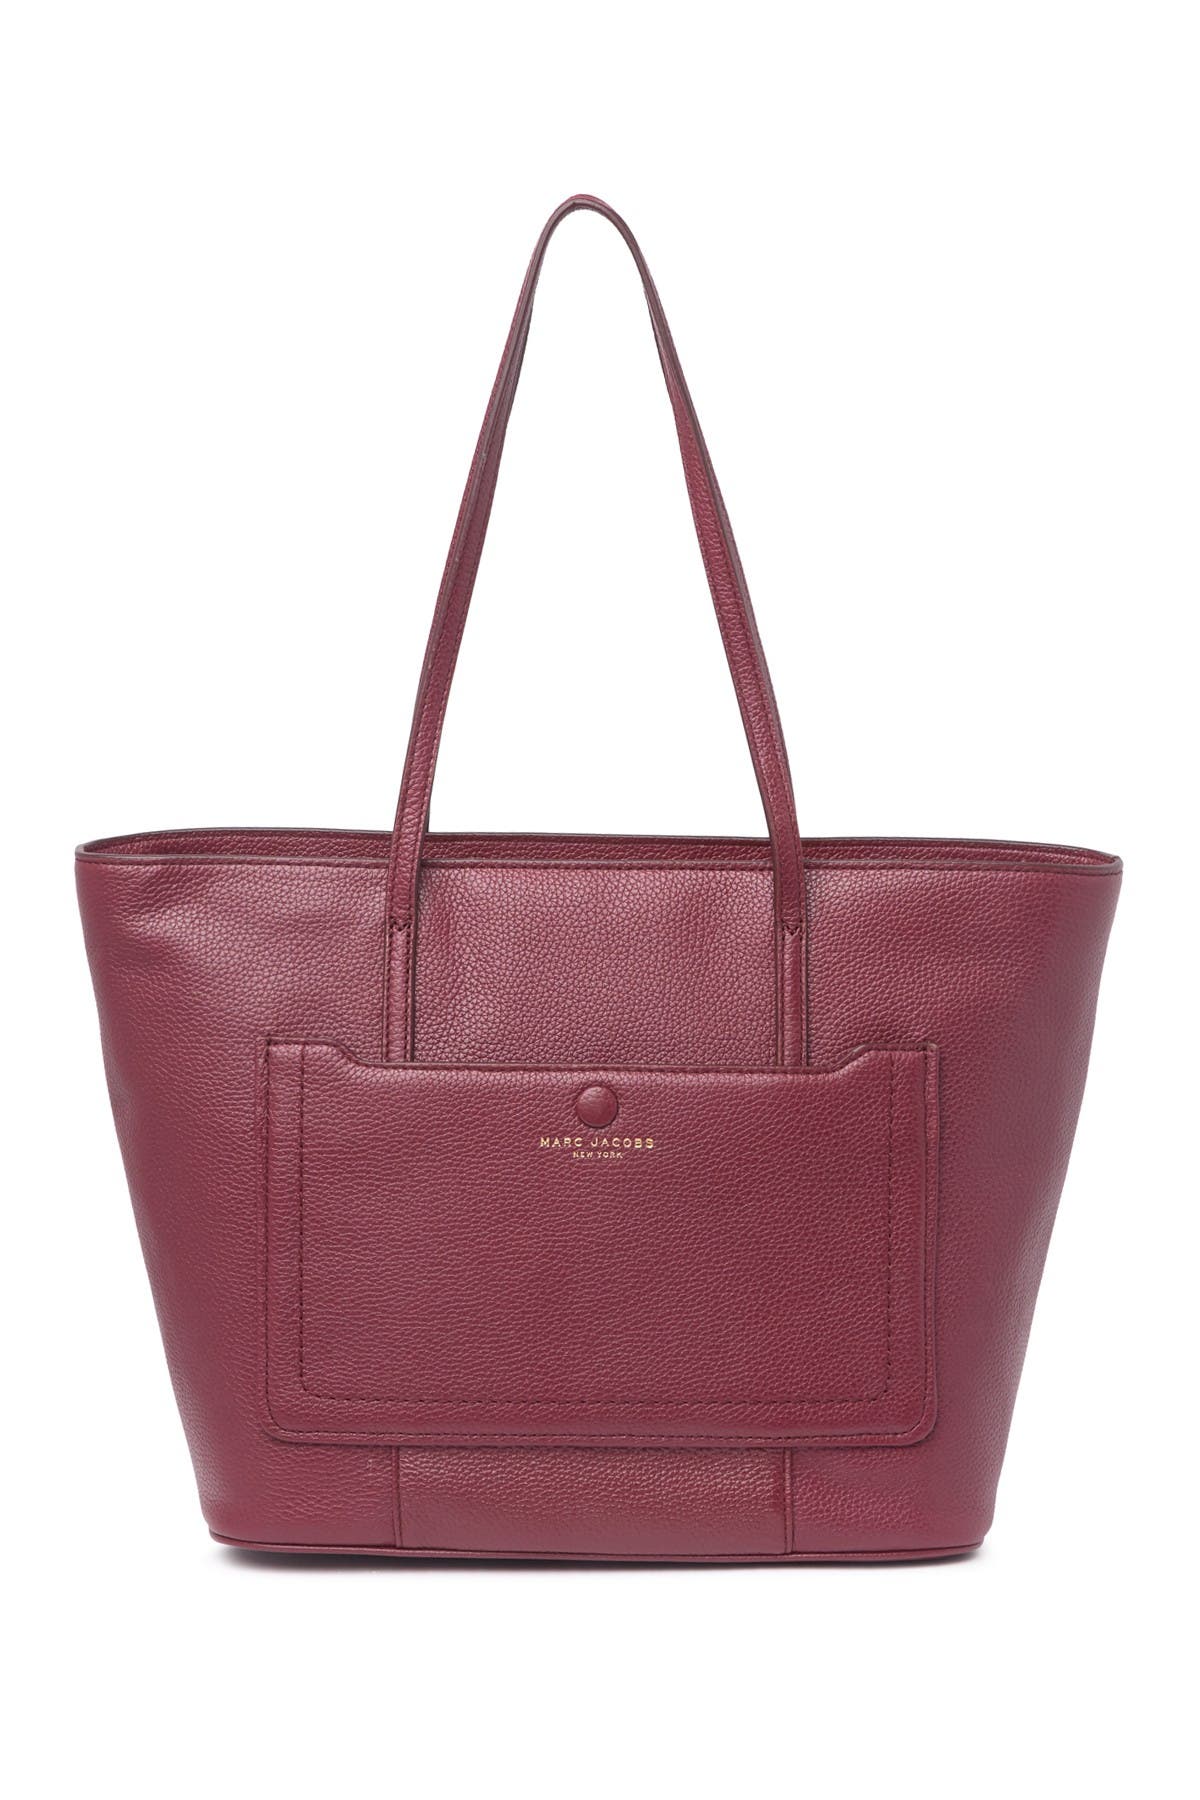 Marc Jacobs | Empire City Leather Shopper Tote Bag | Nordstrom Rack